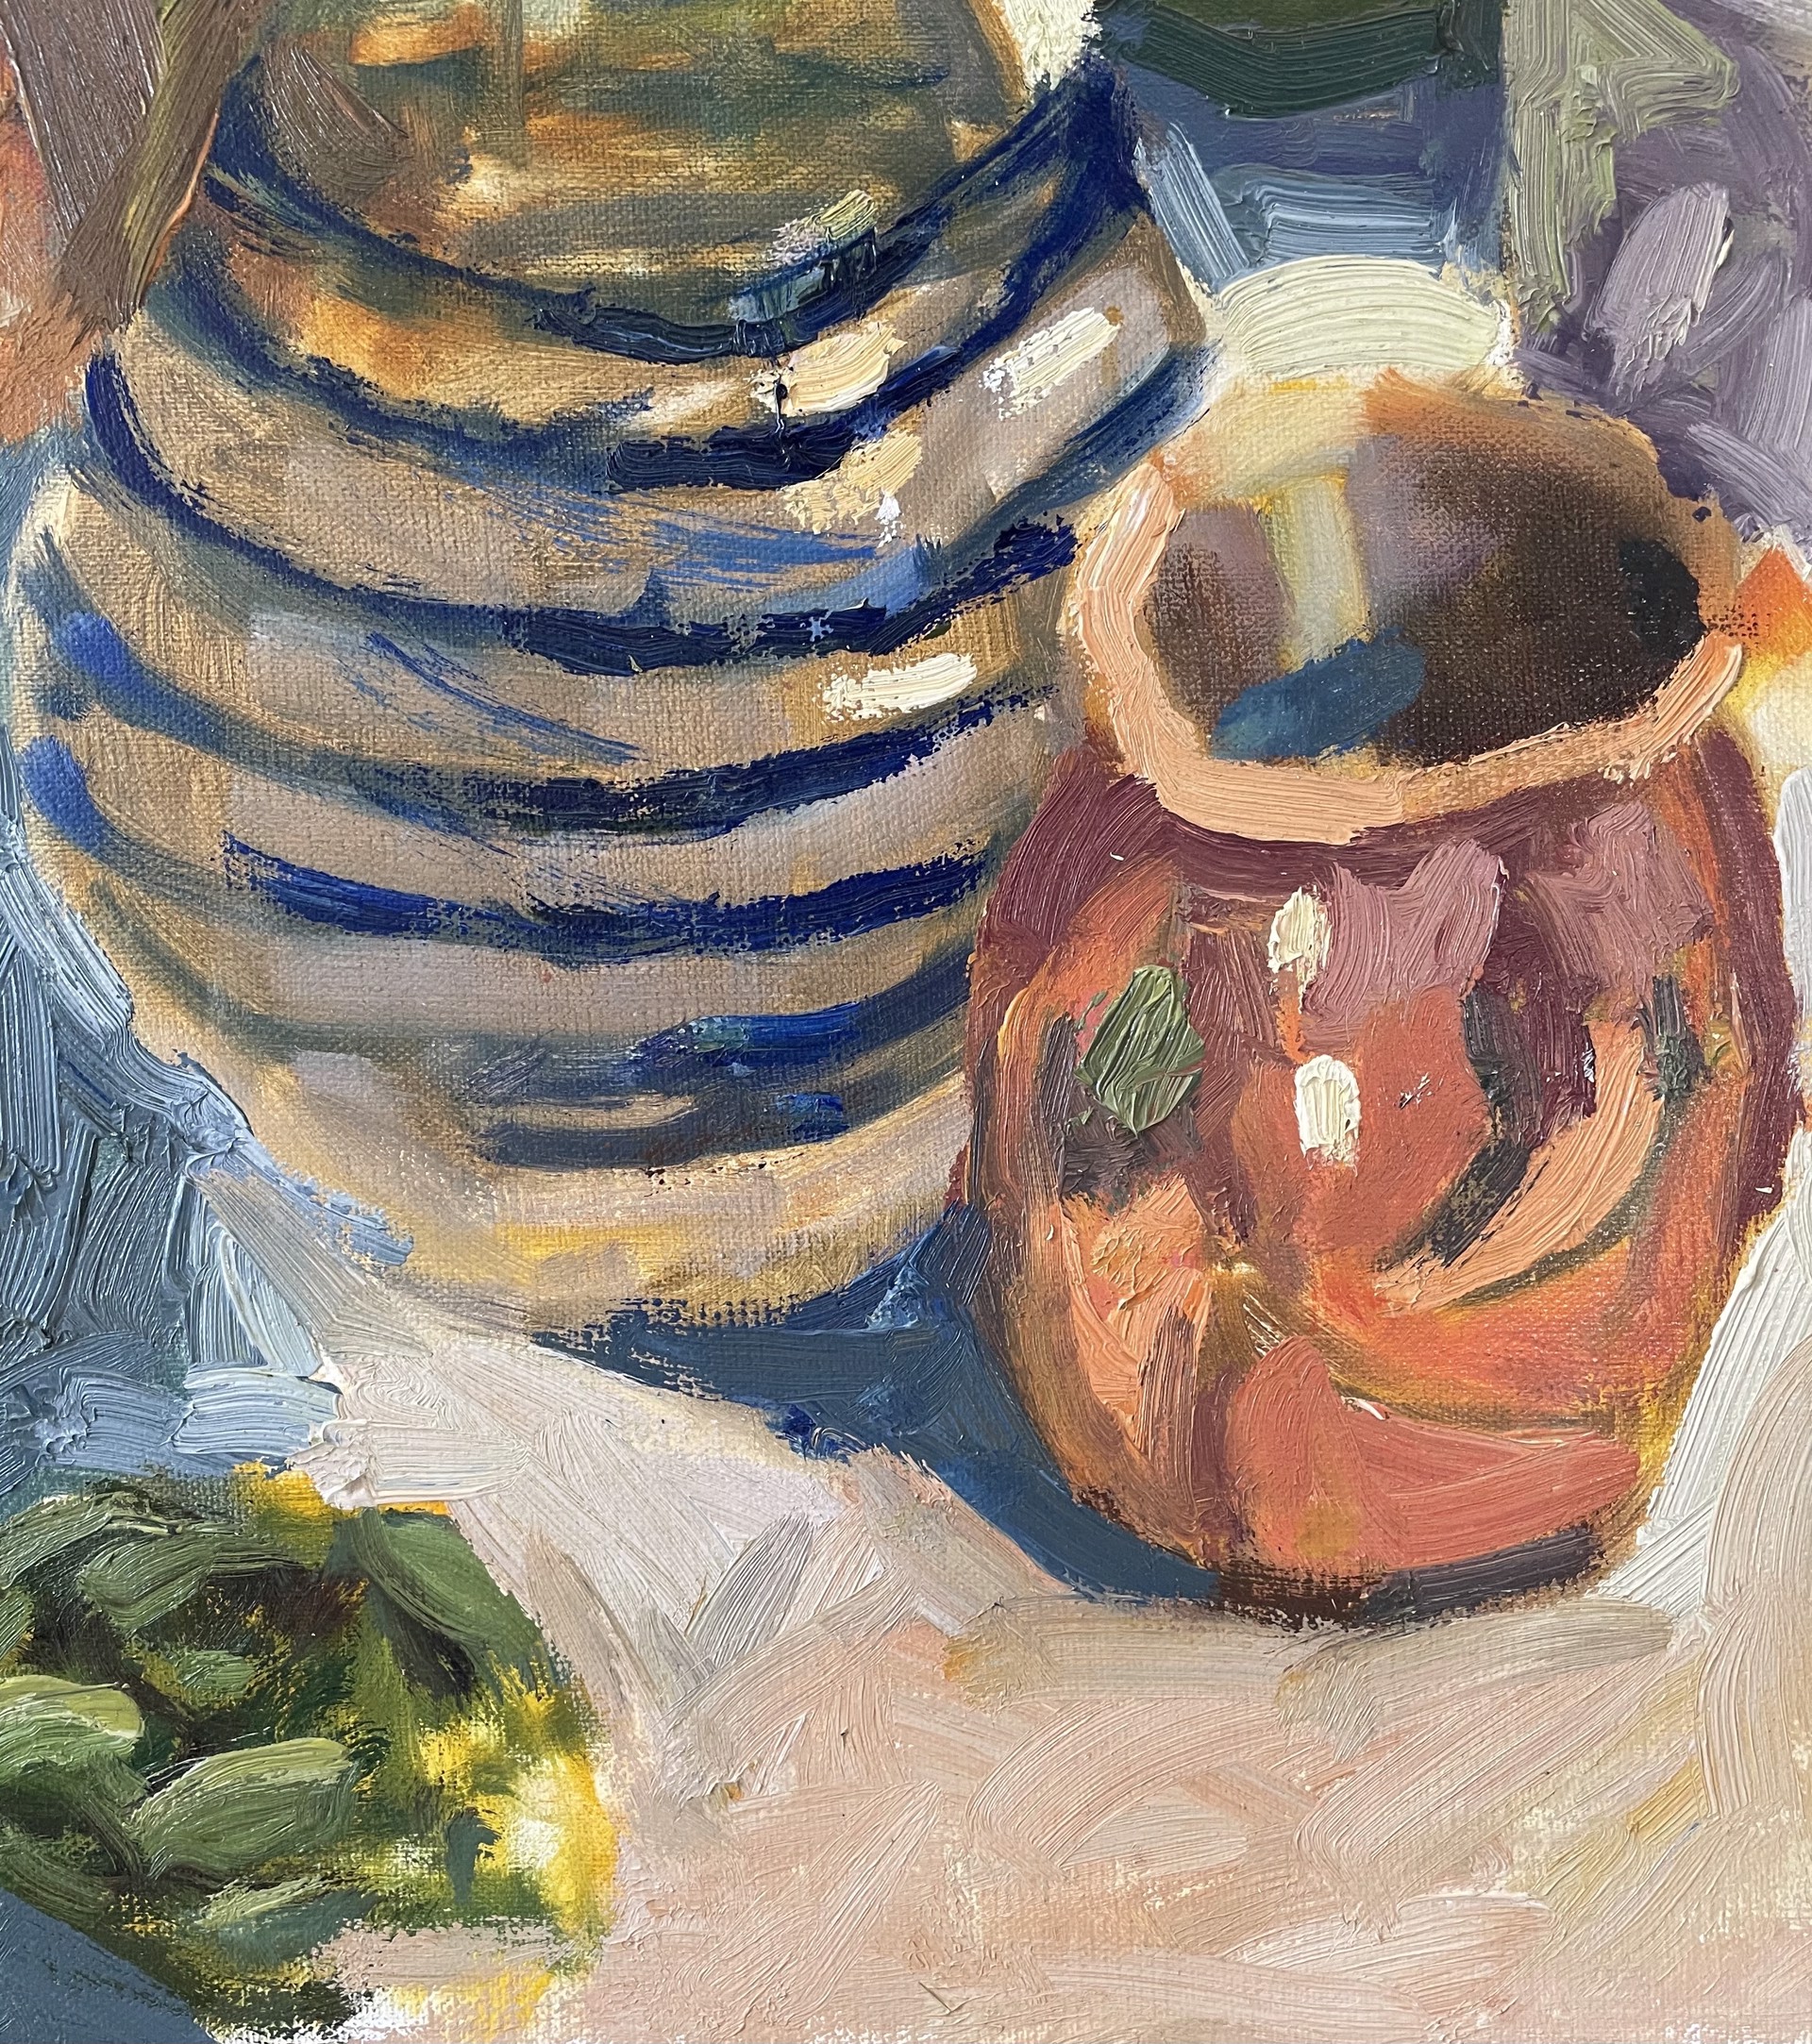 Cups and Pitchers Study by Laurie Meyer